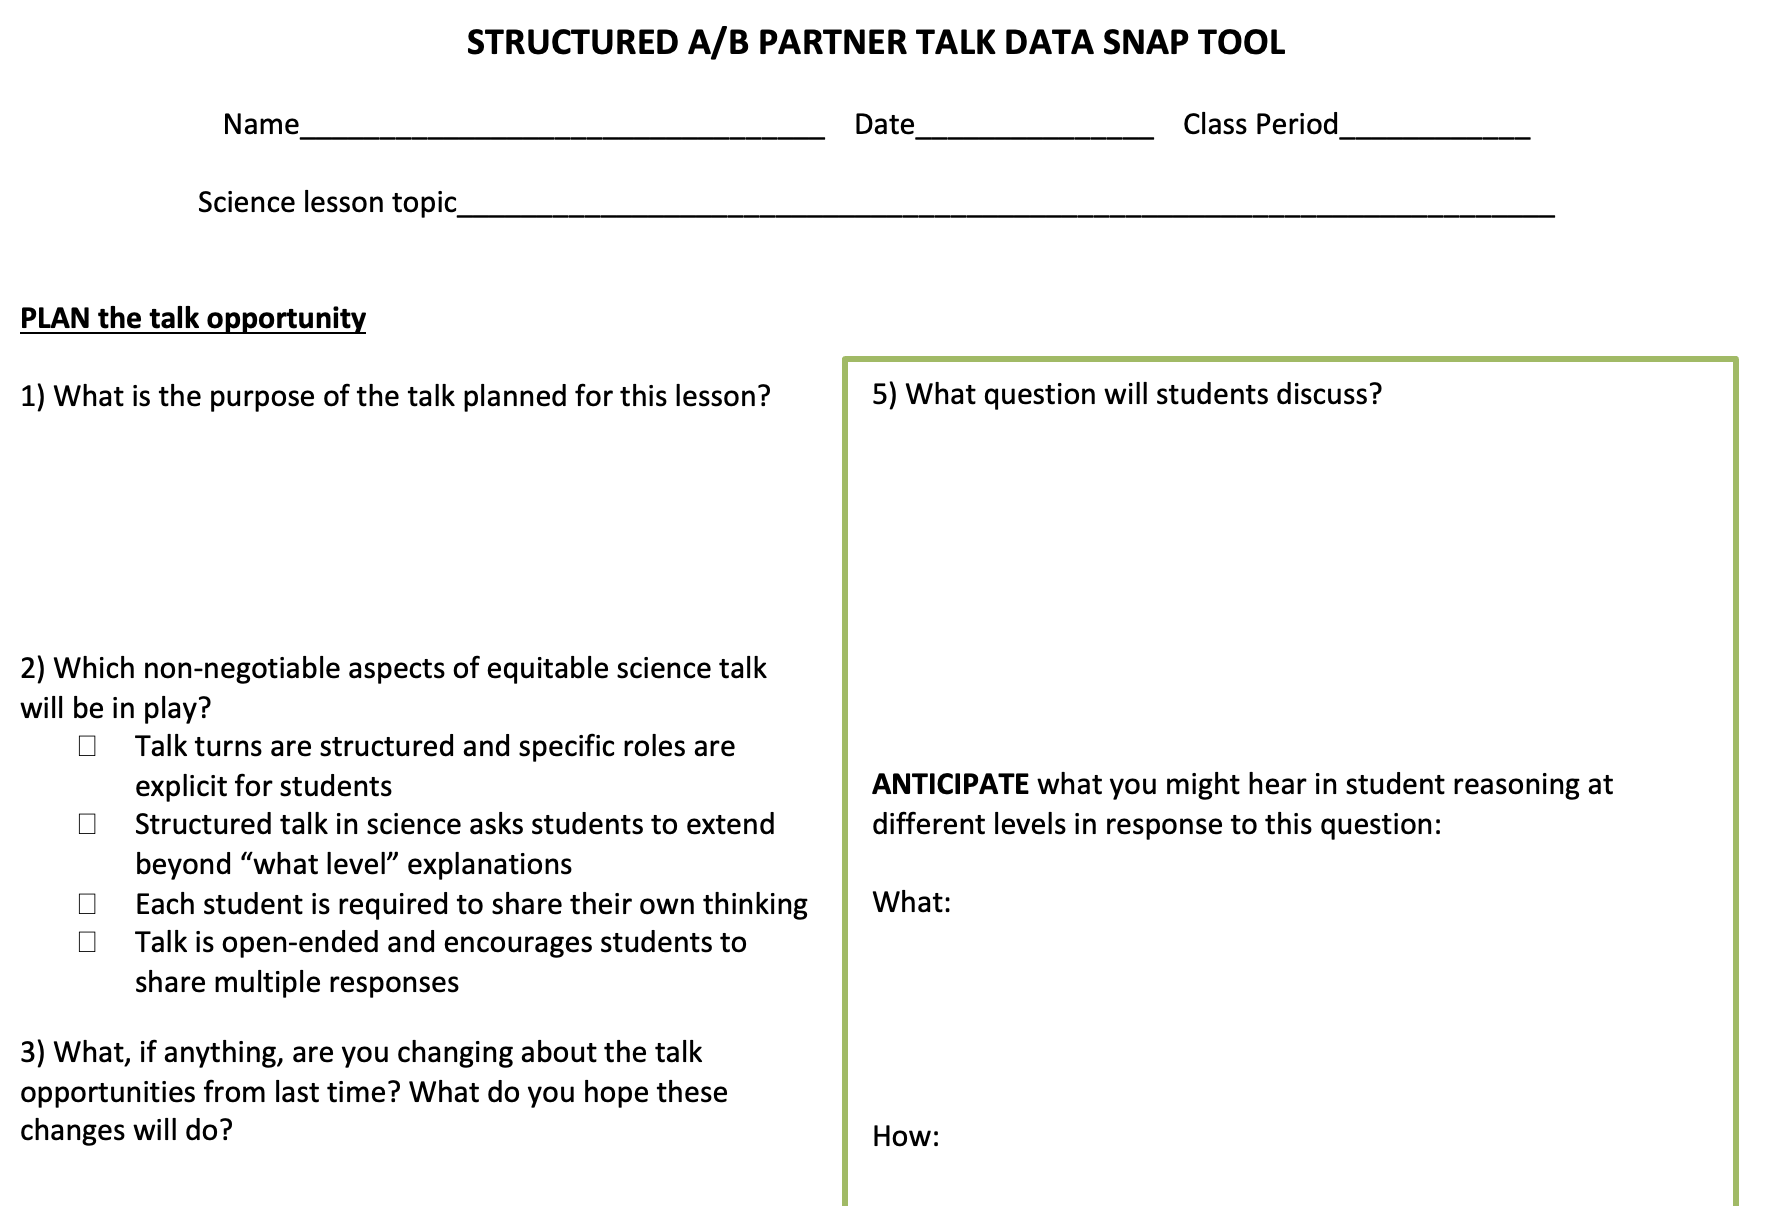 Structured A/B partner talk data snap tool. Plan the talk opportunity: 1. What is the purpose of the talk planned for this lesson? 2. Which non negotiable aspects of equitable science talk will be in play? 3. What, if anything, are you changing about the talk opportunities from last time? What do you hope those changes will do? 5. What question will students discuss? Anticipate what you might hear in student reasoning at different levels in response to this question: What: How: